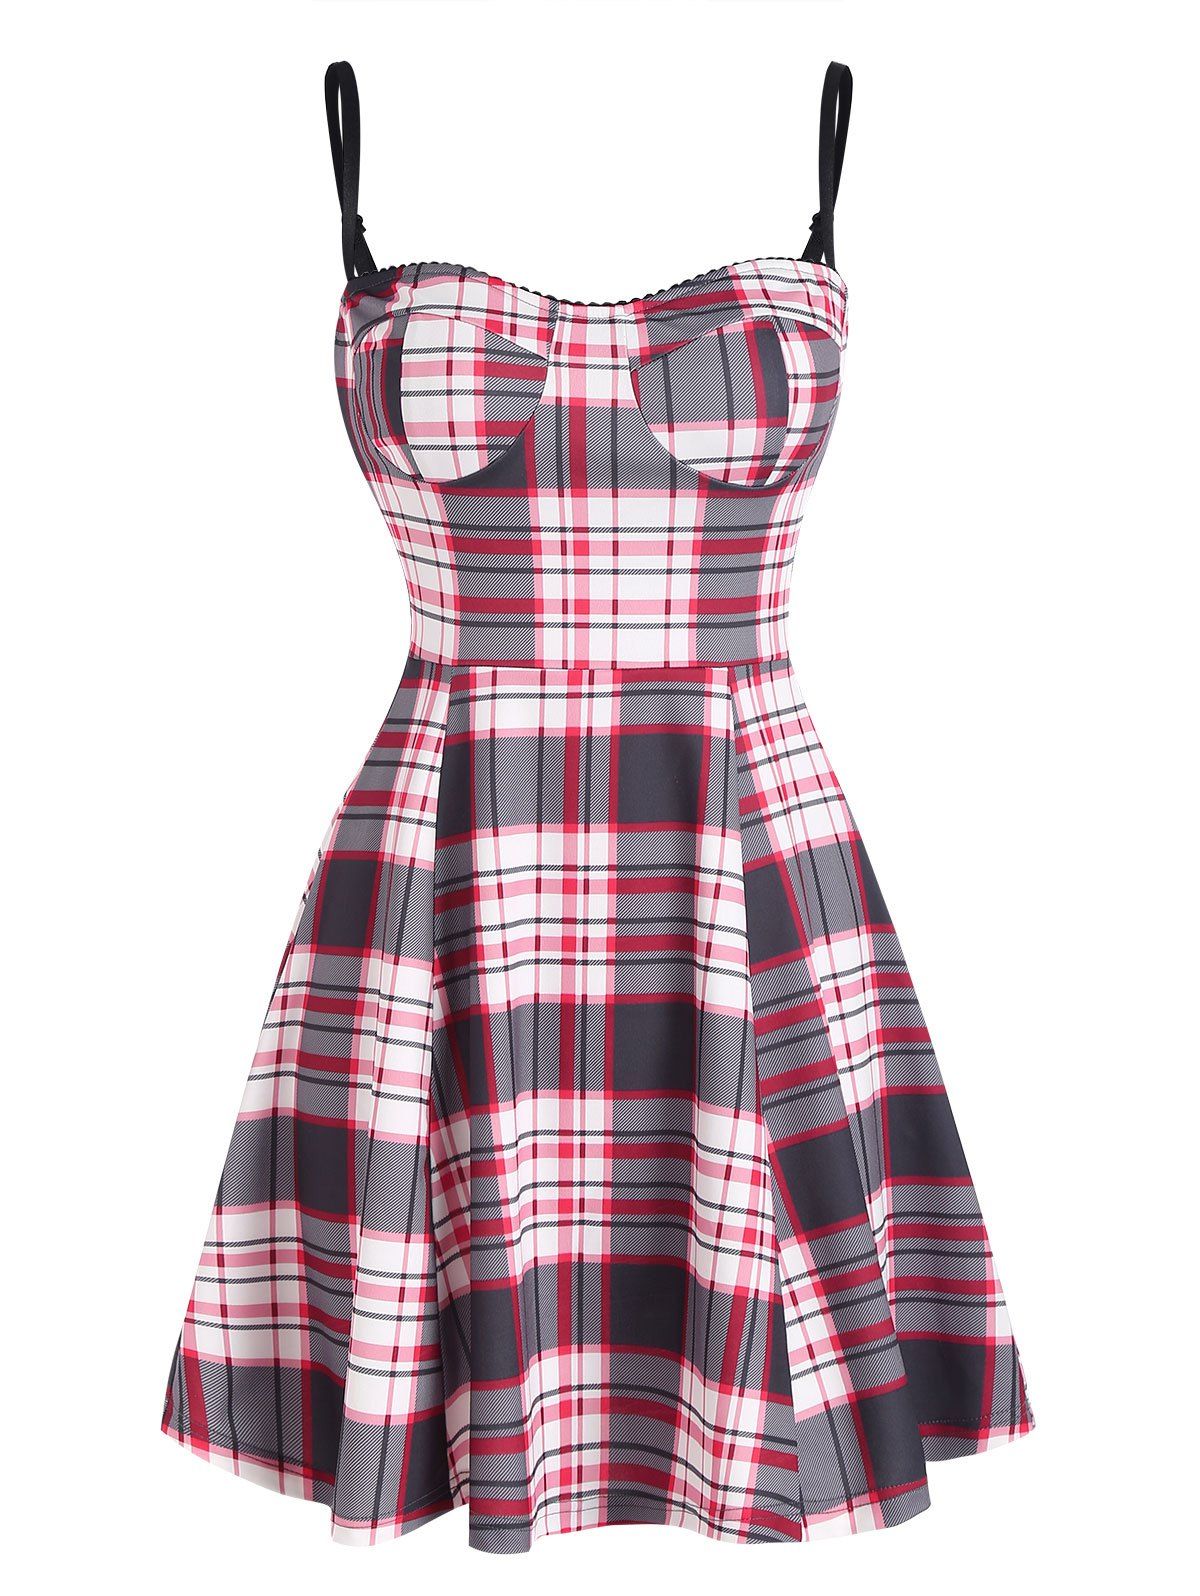 Retro Plaid Checked Cupped Corset Style Cami Skater Dress - LIGHT PINK S